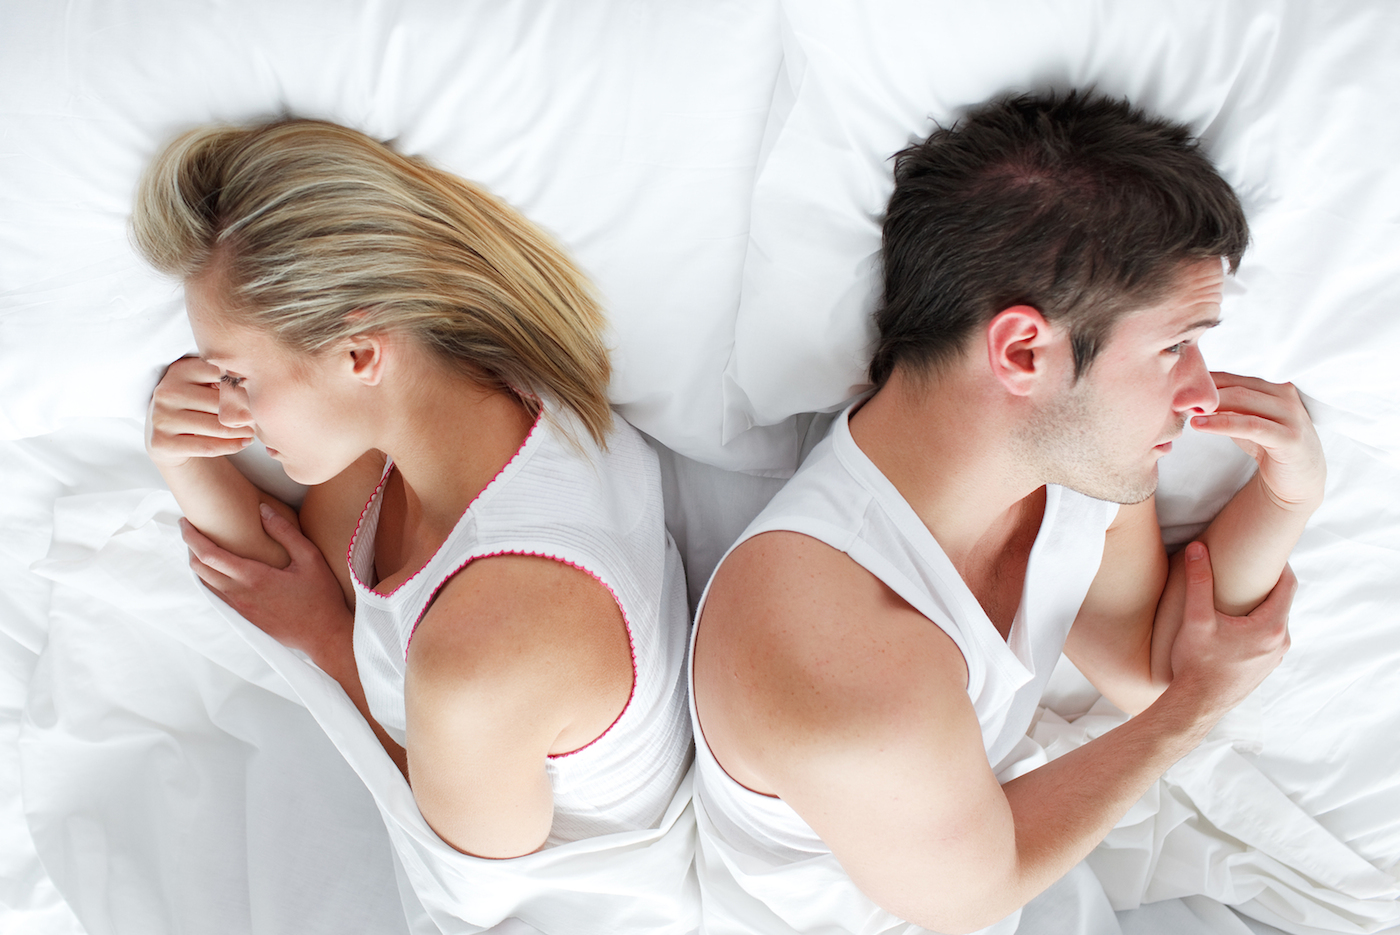 Couple lying separately in bed after having a fight. Marriage trouble